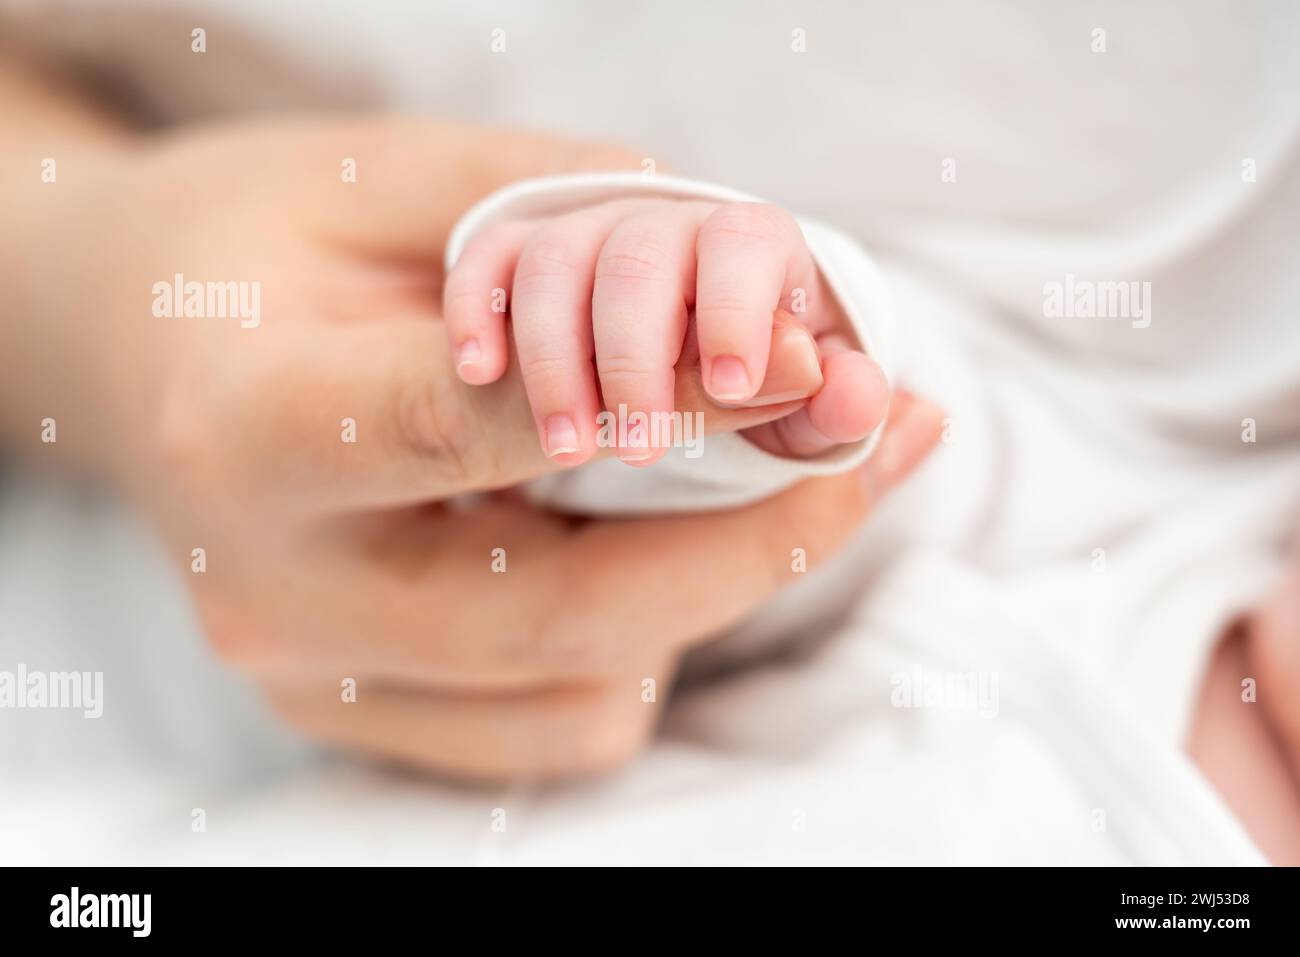 Newborn baby's gentle grasp on mother's finger evokes emotions. Concept of maternal bond and trust Stock Photo